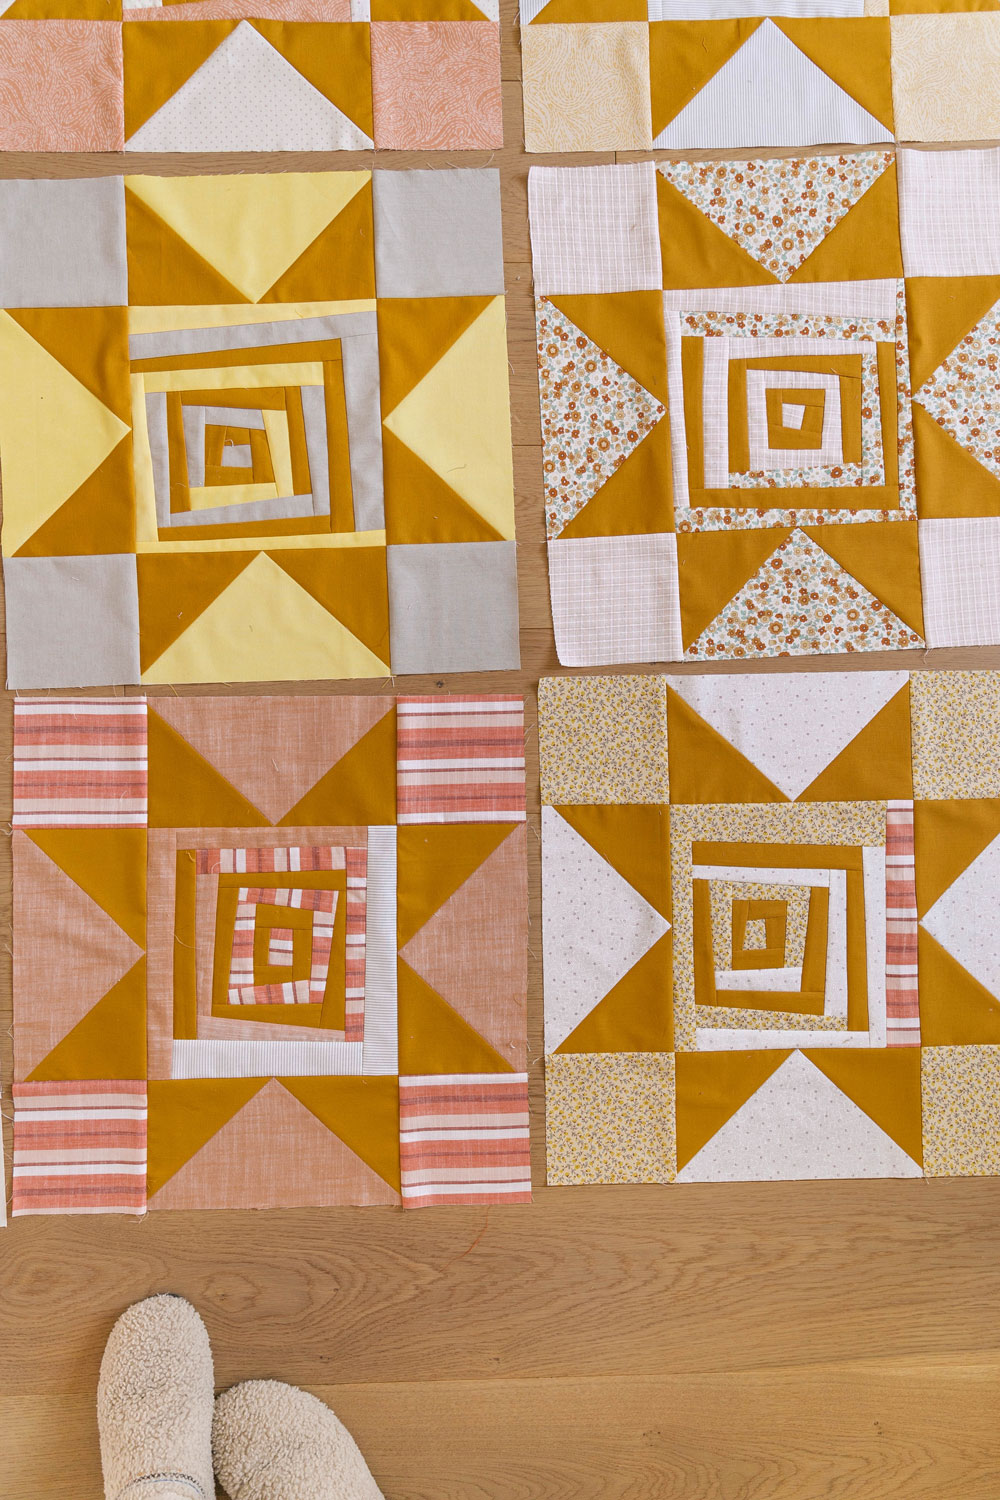 In week 5 of the Shining Star quilt sew along we assemble our blocks. Join me foe added tips on how to do that accurately and efficiently! suzyquilts.com